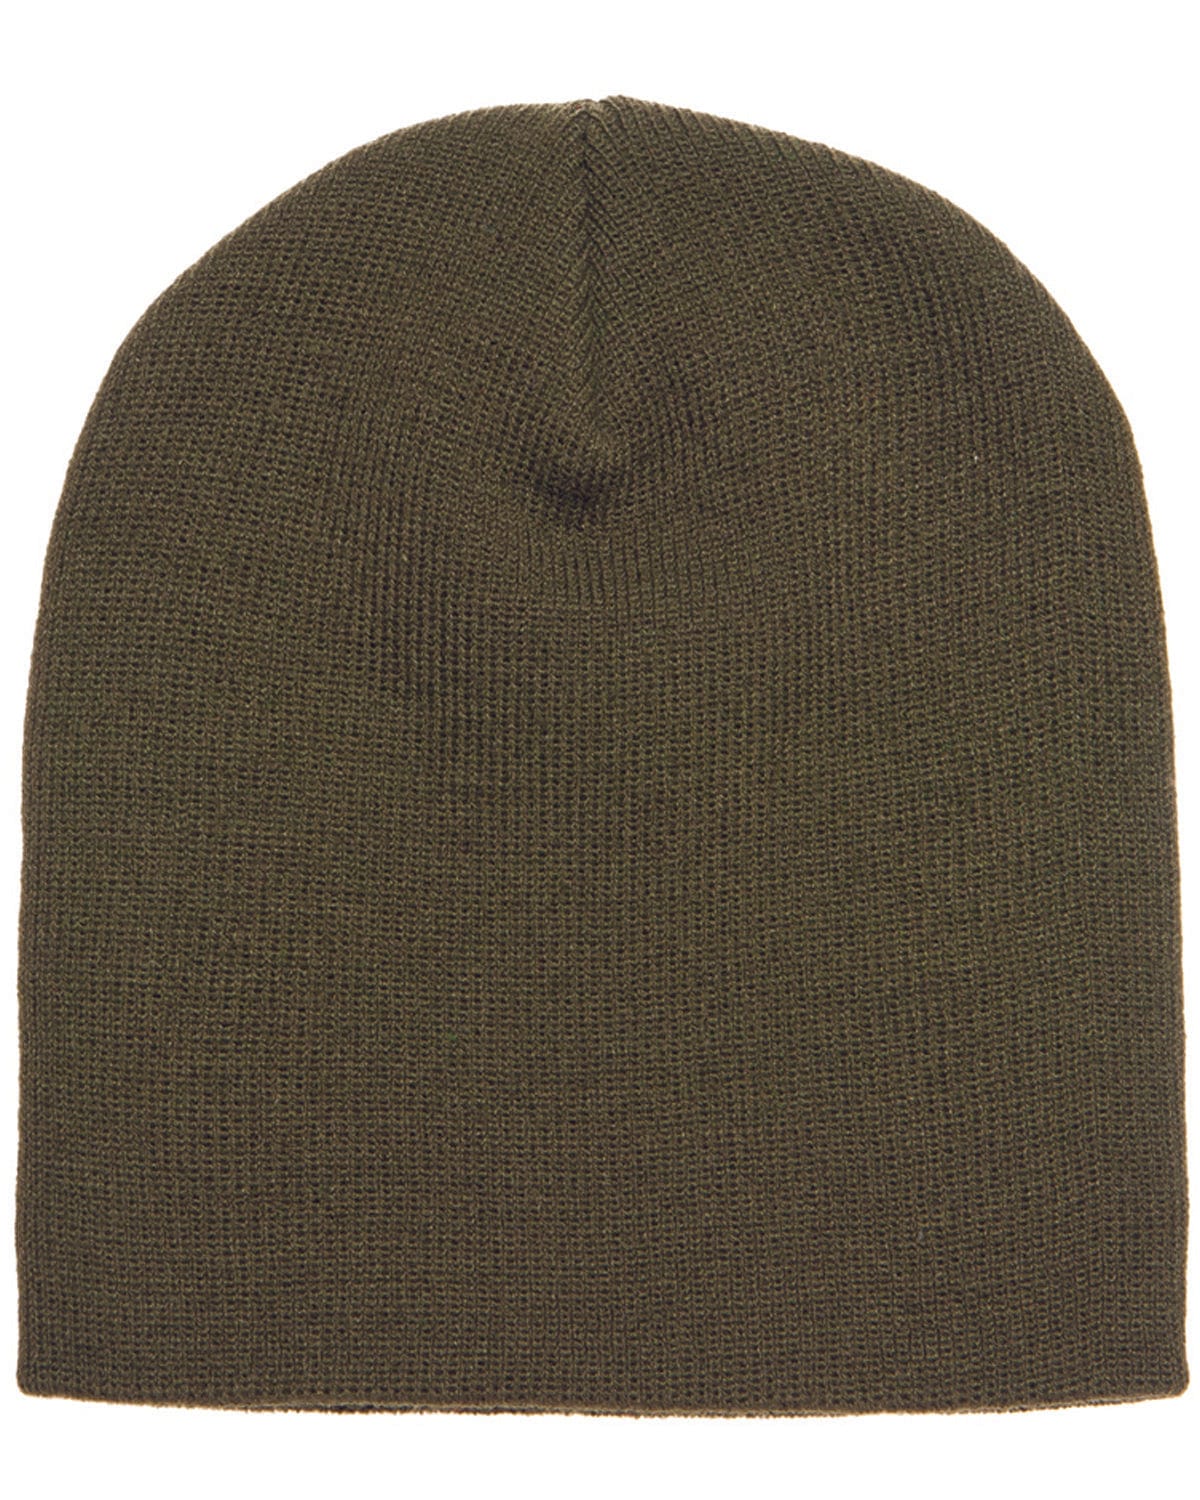 Yupoong 1500: Adult Knit Beanie